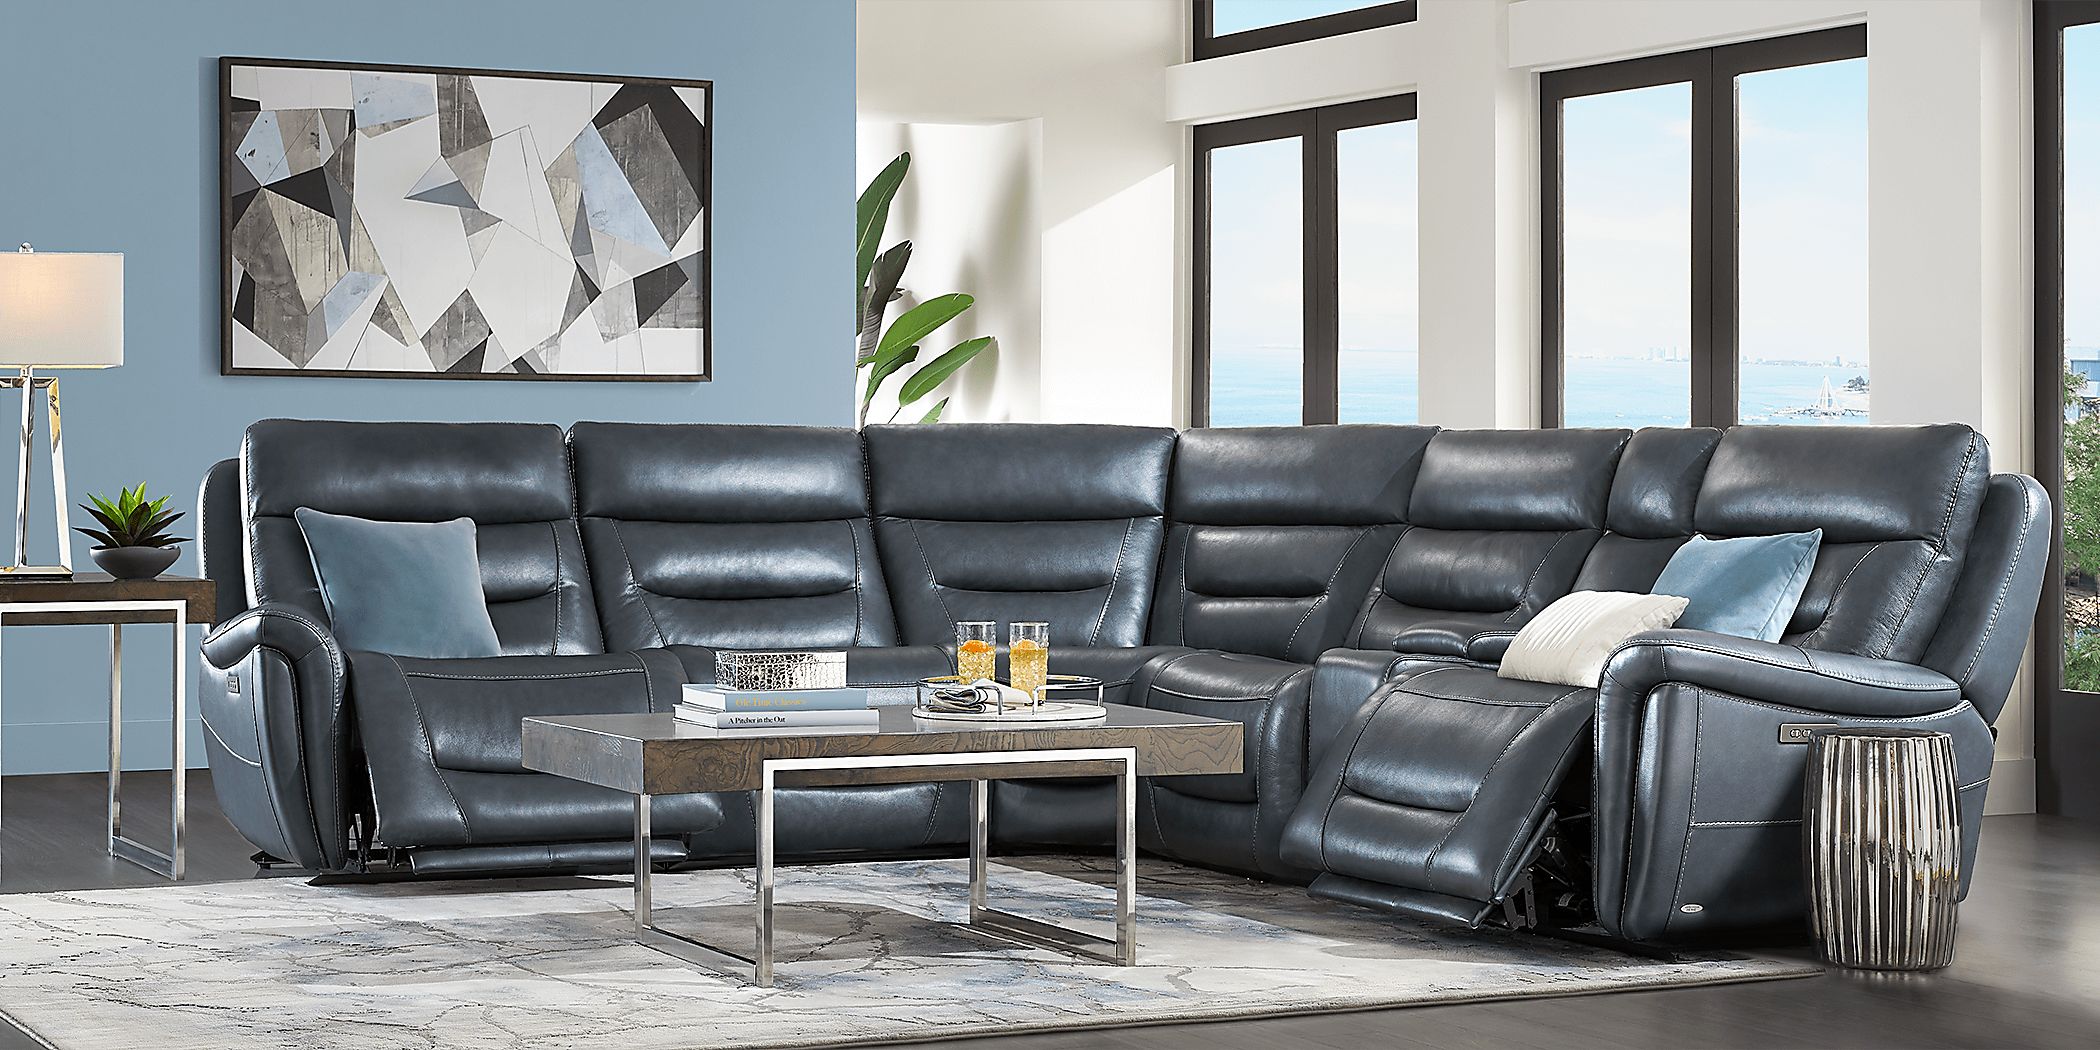 Regis Park Midnight Leather 9 Pc Dual Power Reclining Sectional Living Room